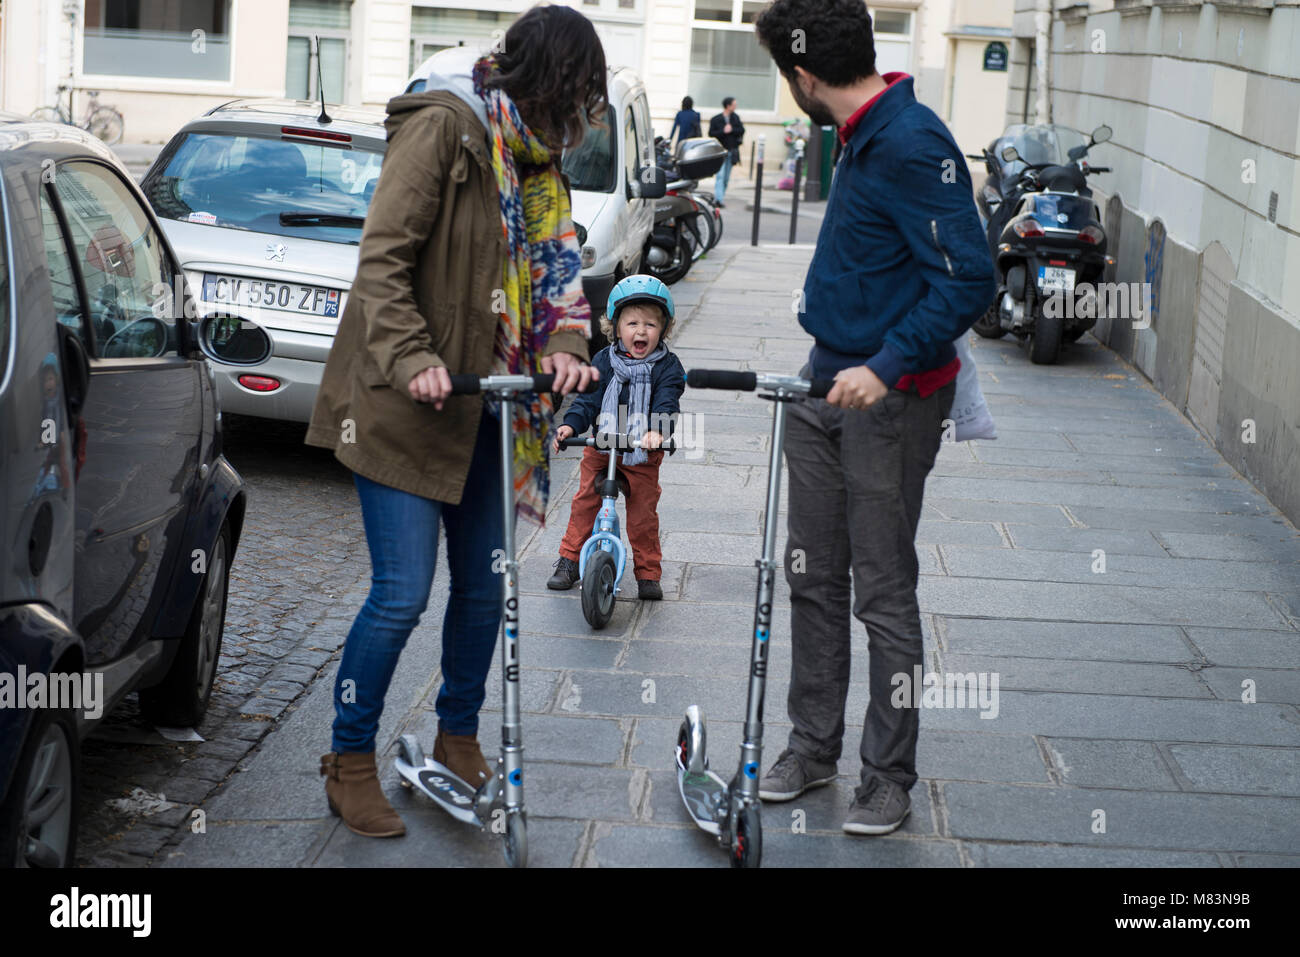 Parents with crying child and push scooters in street, Paris, France Stock Photo